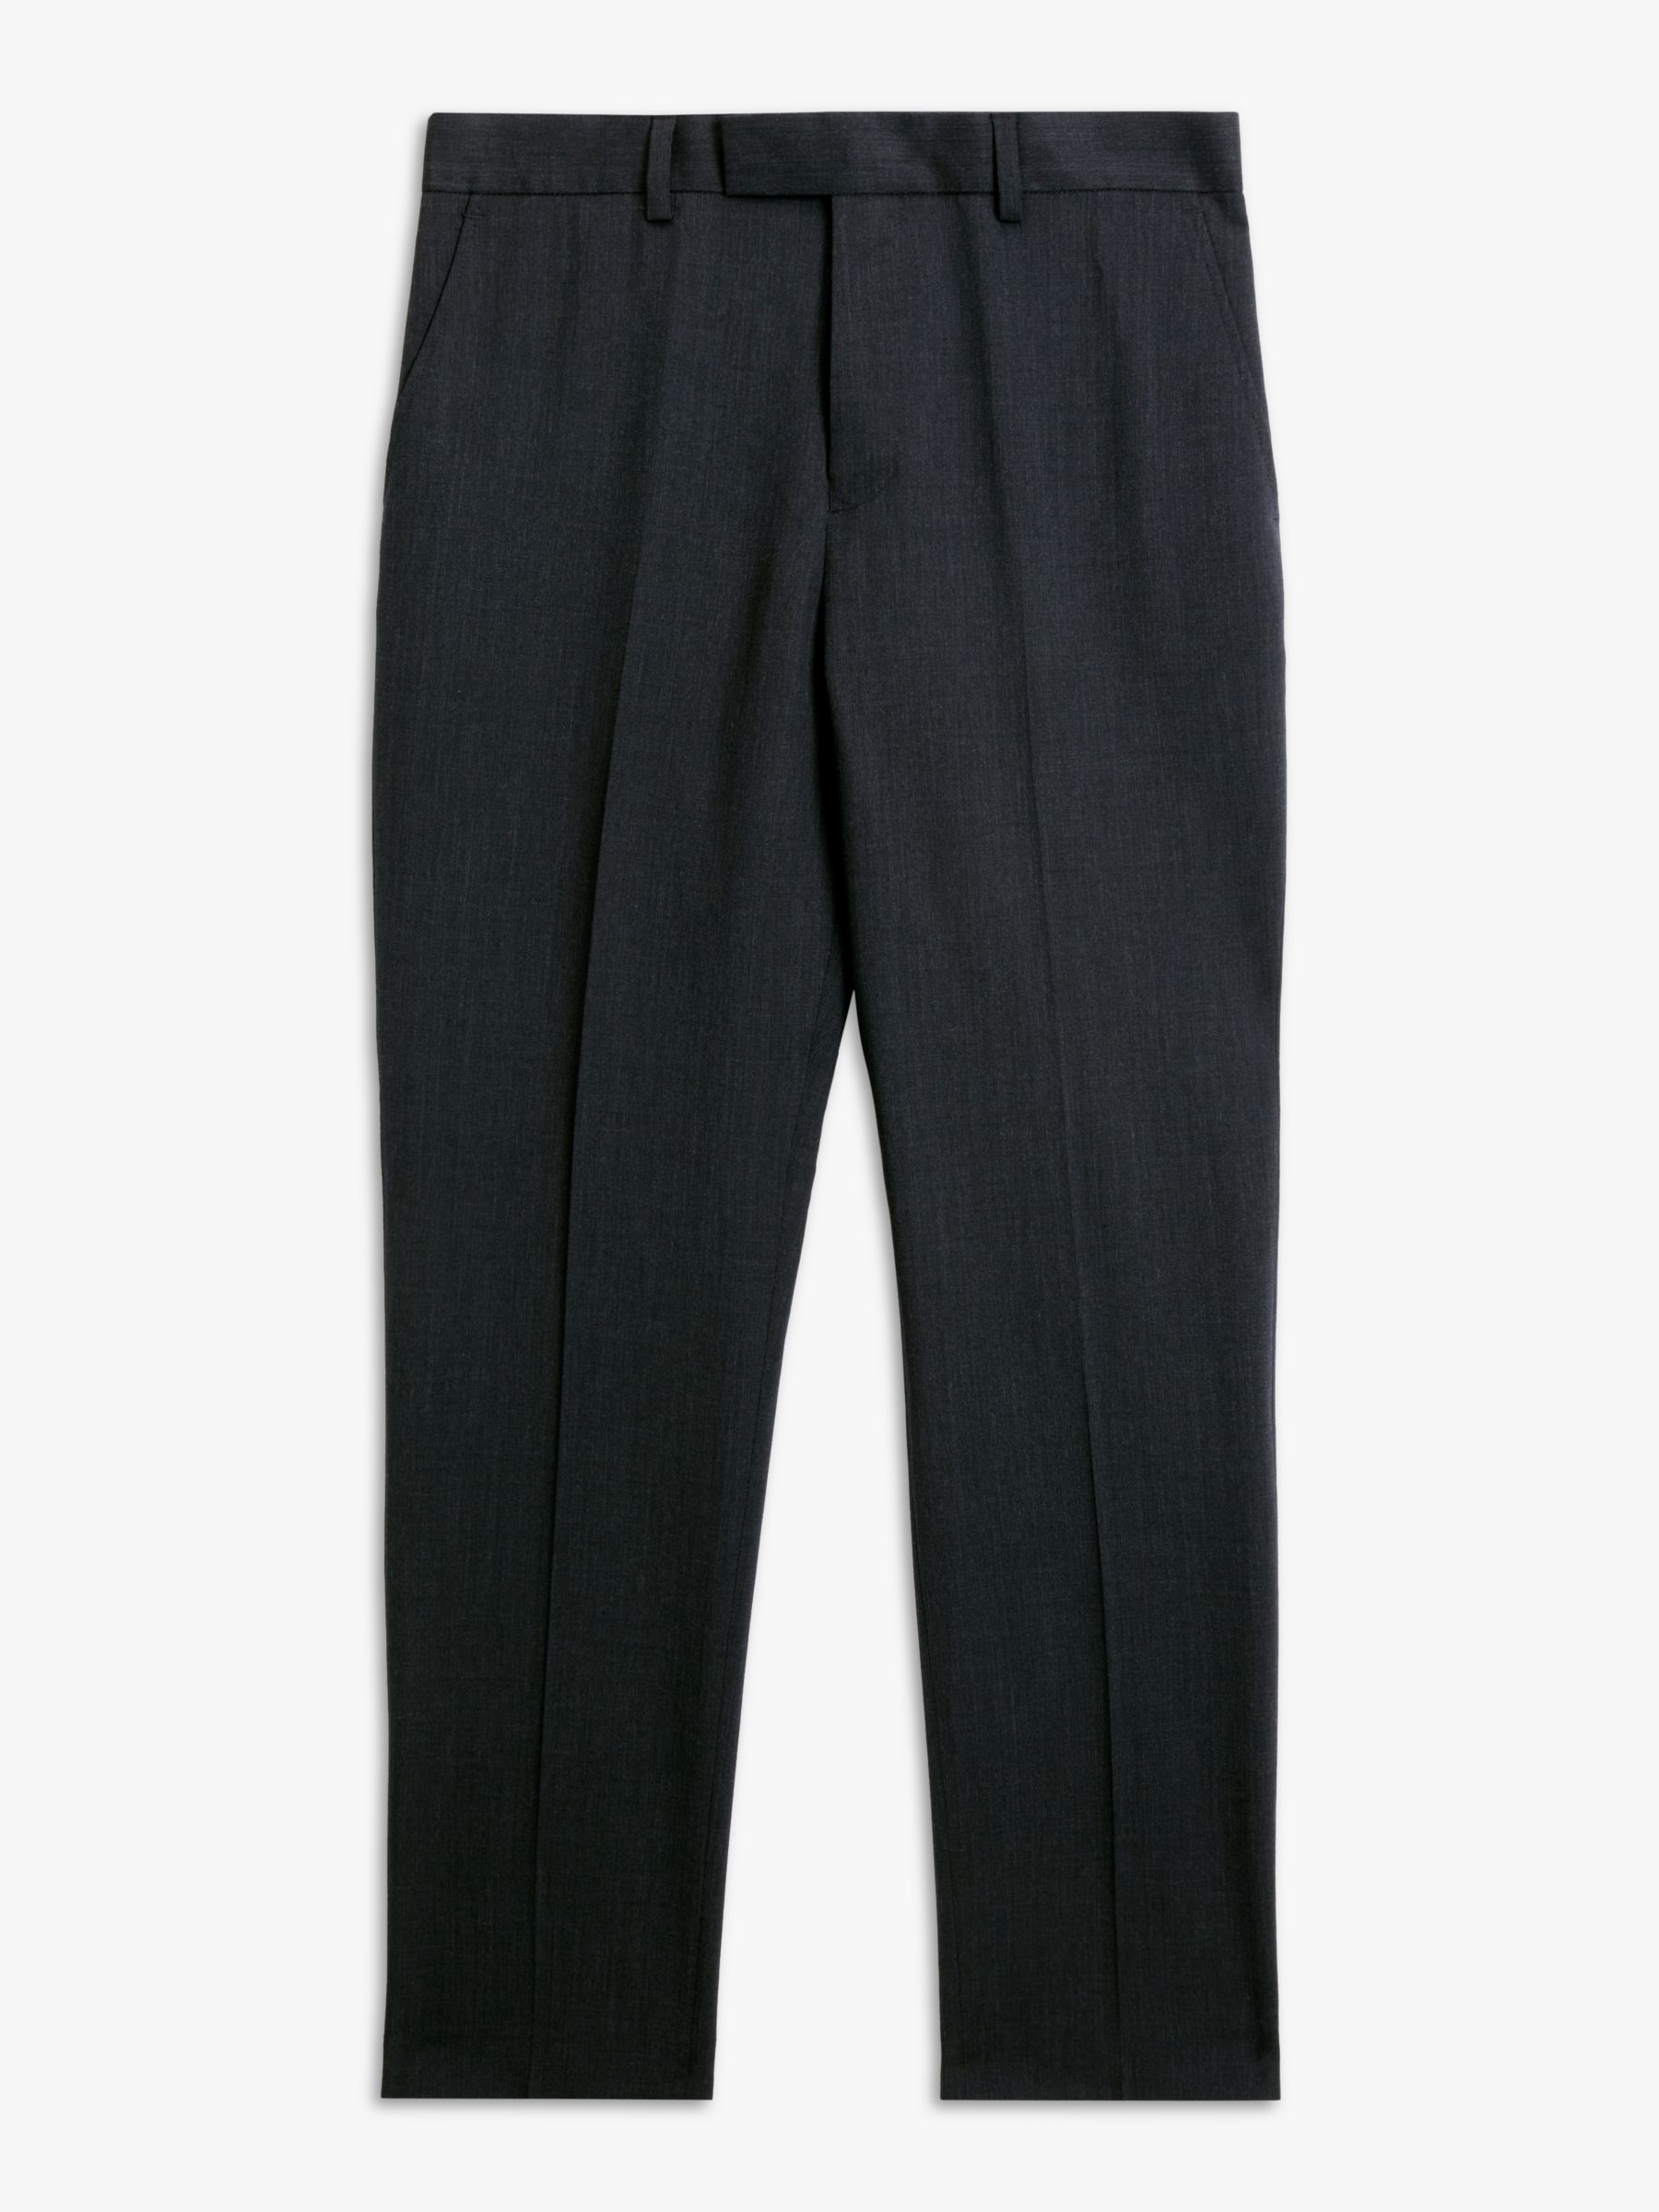 John Lewis Washable Wool Blend Regular Fit Suit Trousers, Charcoal at ...